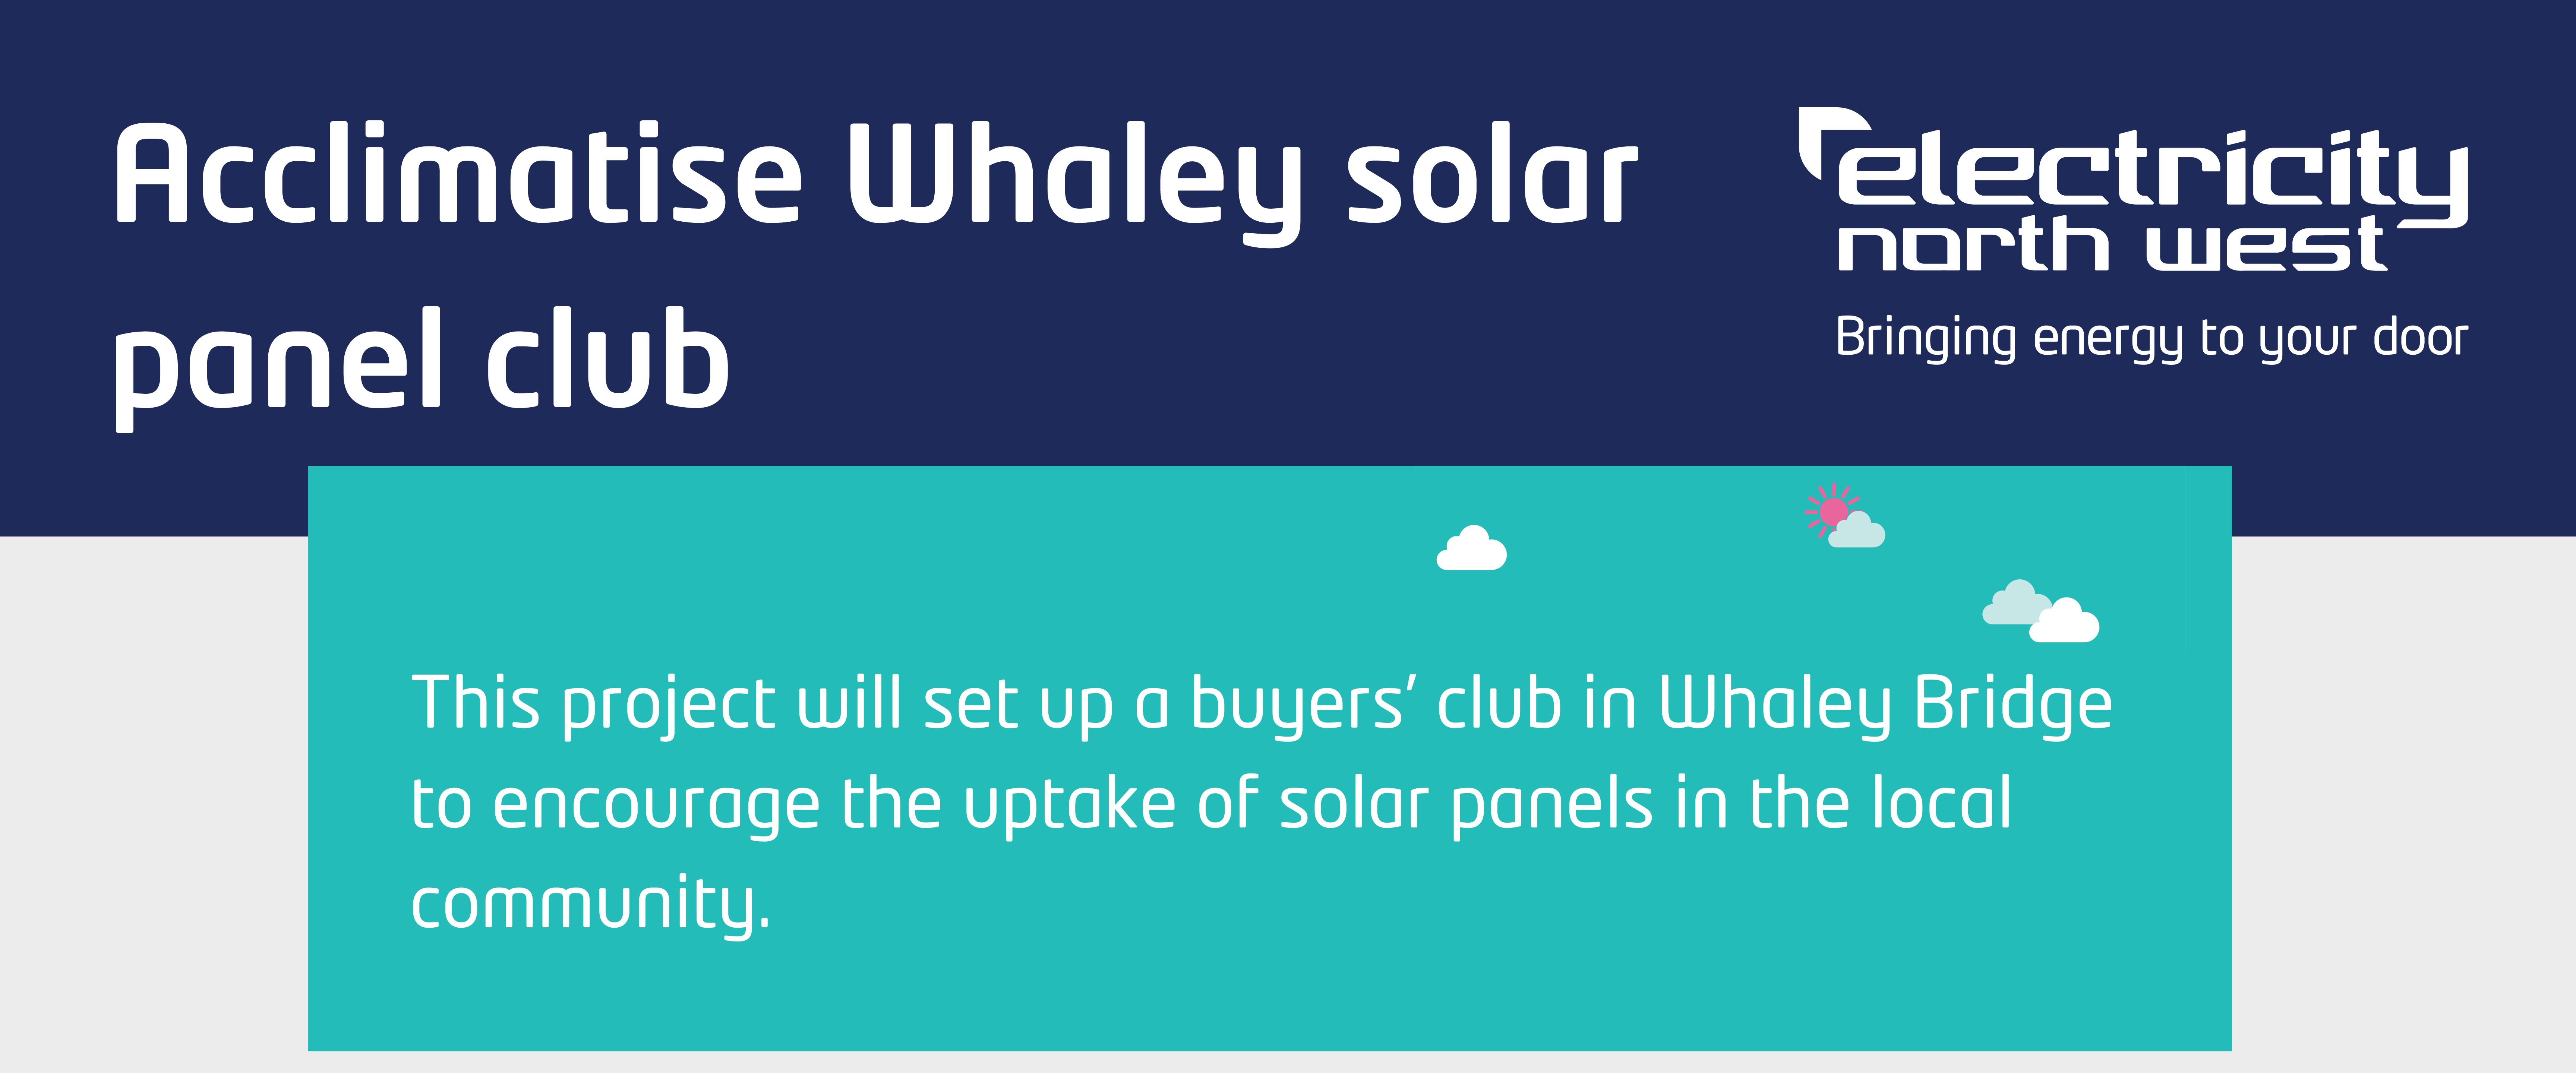 Acclimatise Whaley solar panel club, This project will set up a buyers’ club in Whaley Bridge to encourage the uptake of solar panels in the local community.